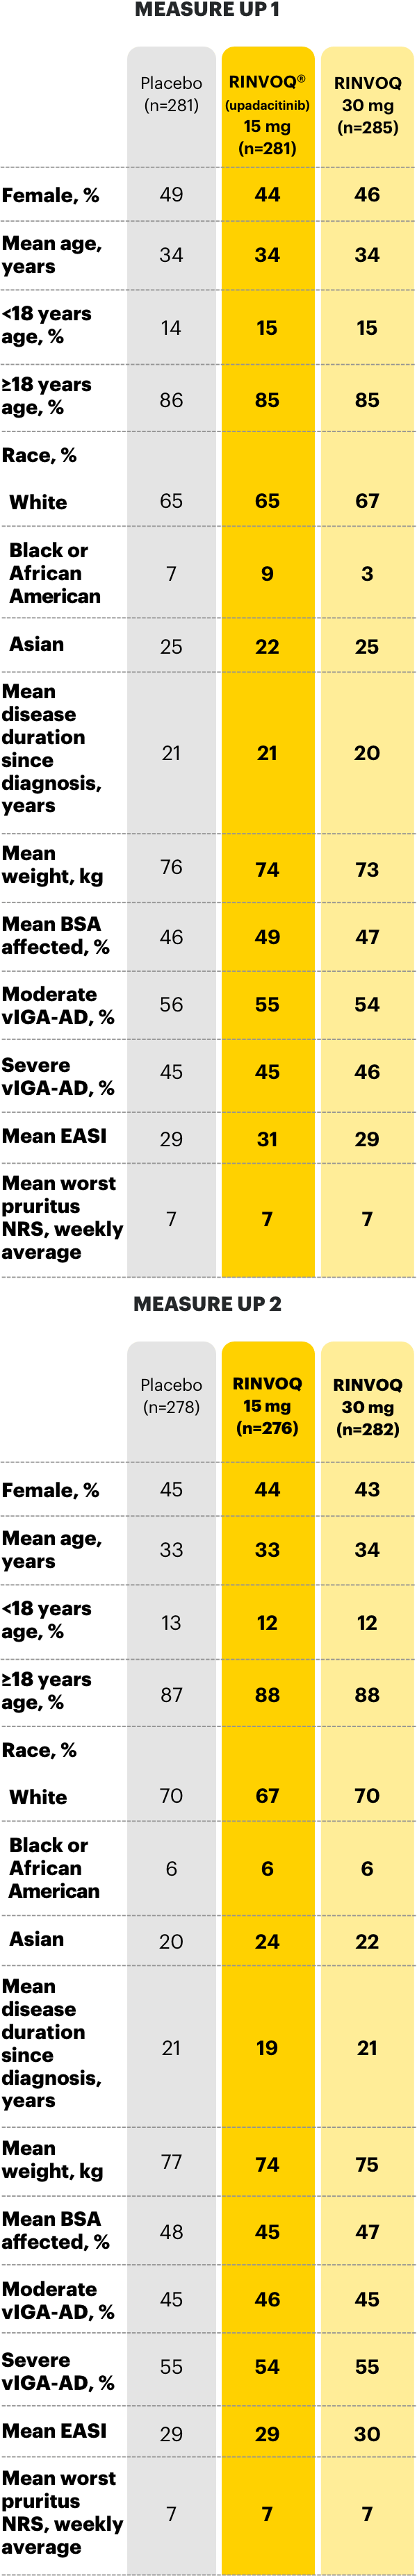 Table outlining the Baseline Characteristics of patients in the MEASURE UP 1 and MEASURE UP 2 trial with RINVOQ® (upadacitinib).